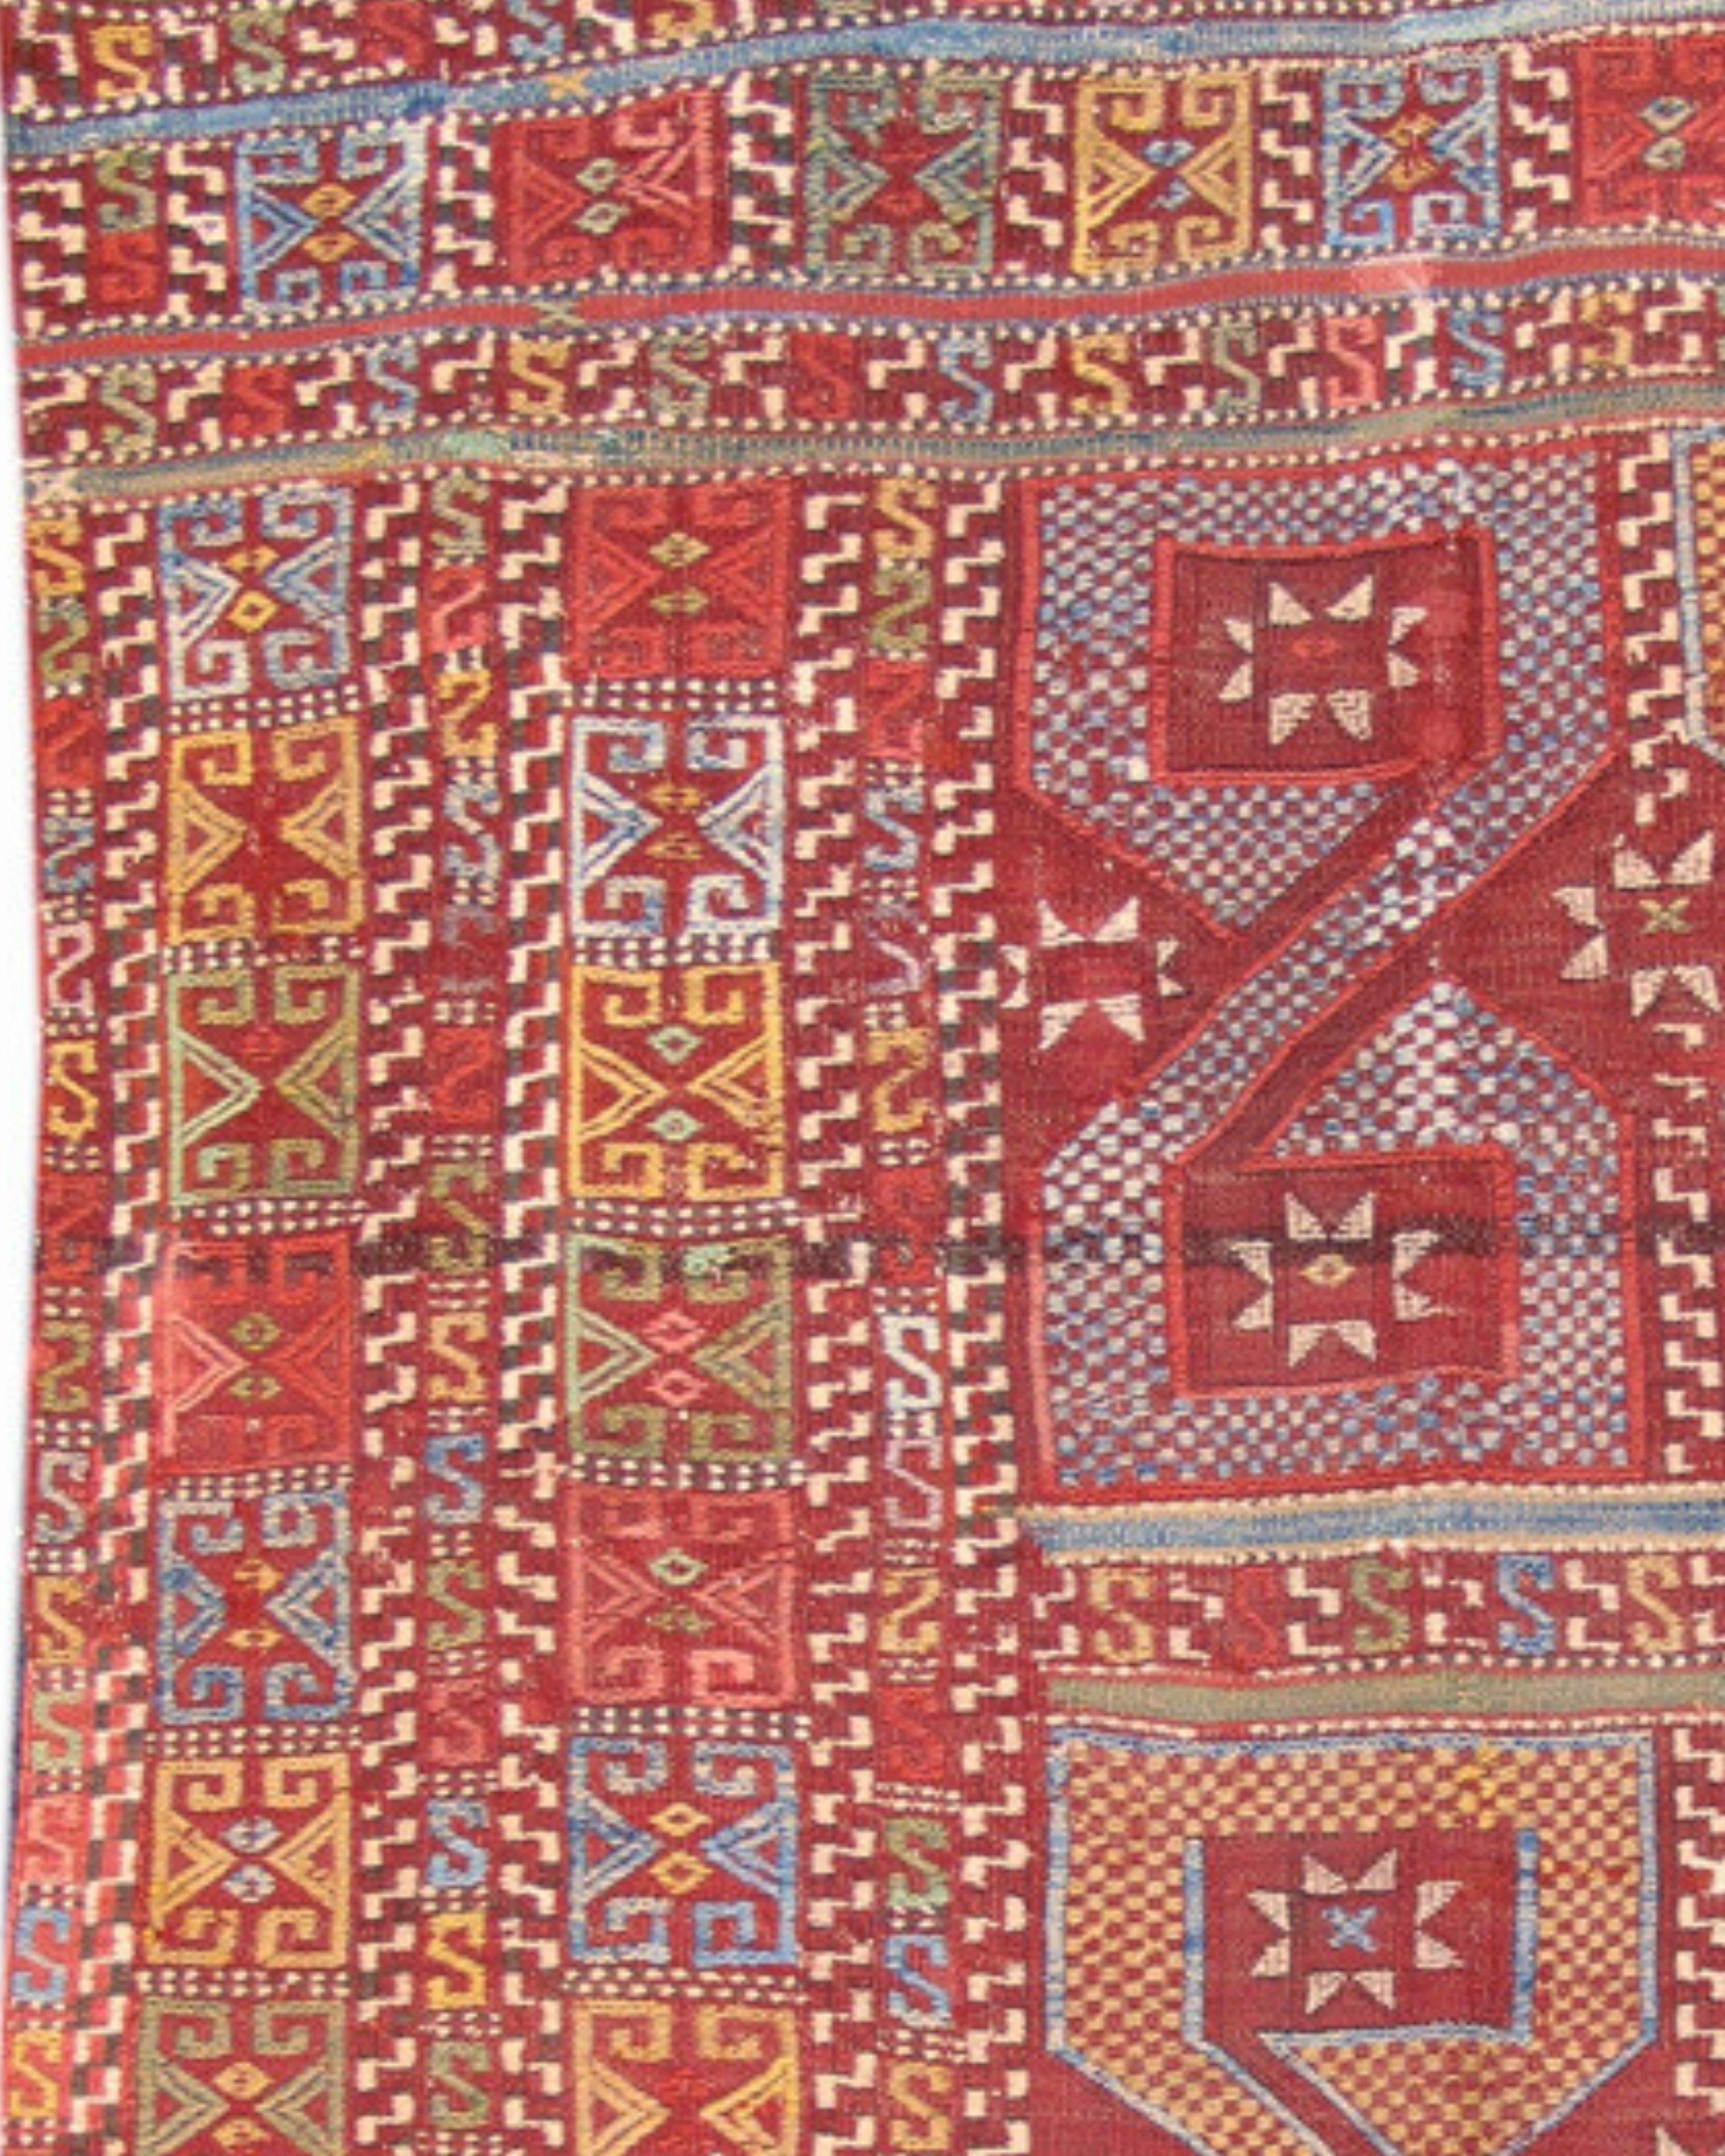 Hand-Woven Antique Red Turkish Jajim Flat-Weave Rug, Mid-19th Century  For Sale